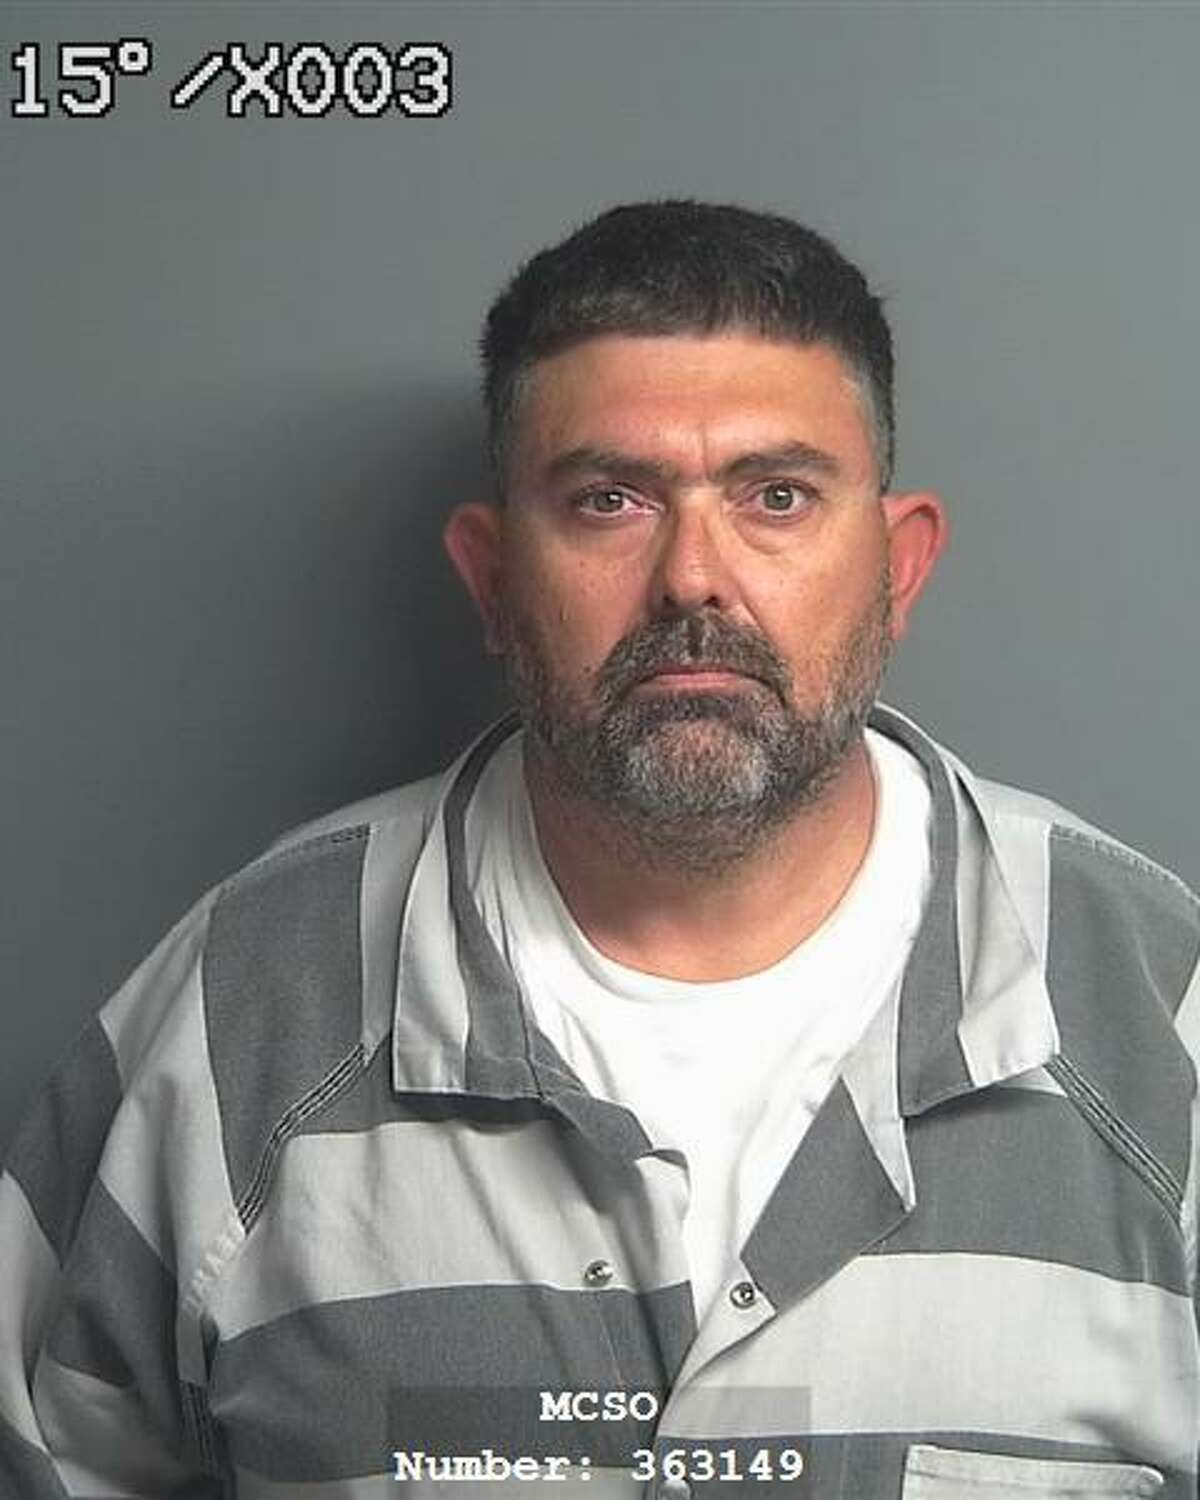 Eric Lane Roberts, 43, of Lamesa, is being charged with continuous sexual abuse of a child under 14, a first-degree felony.